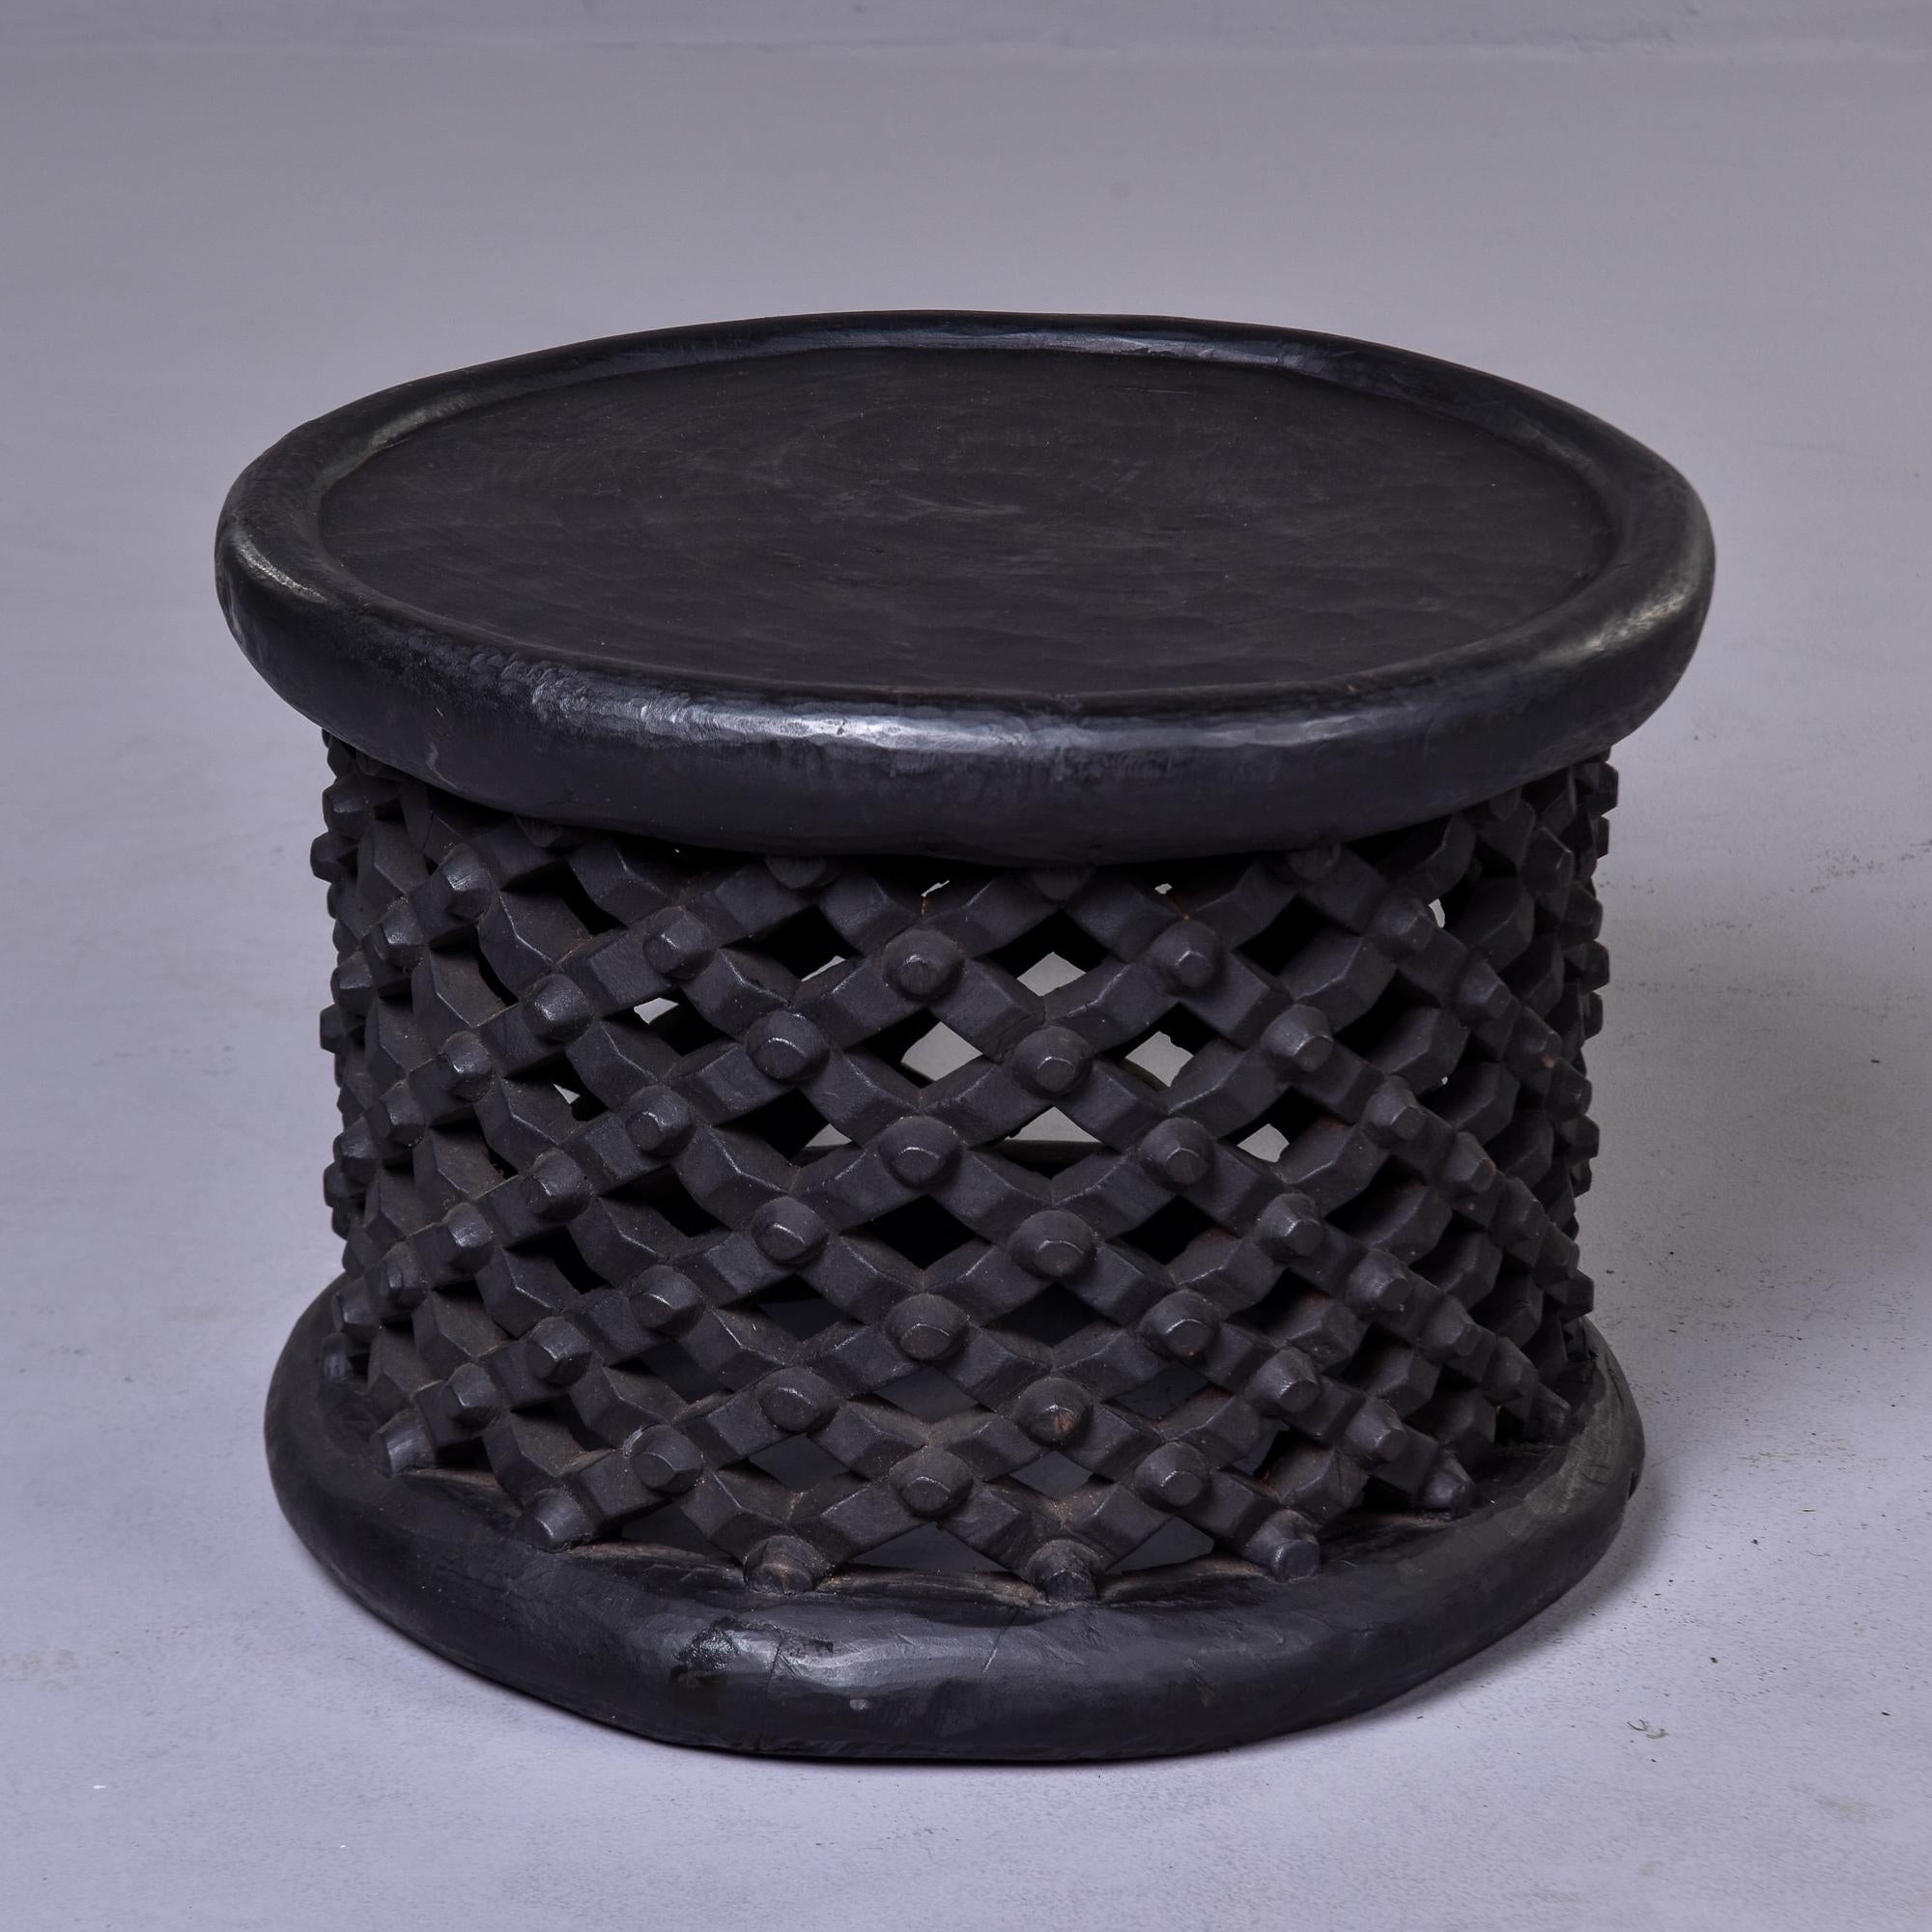 Circa 1980s round dark wood stool or side table. Hand-carved by a tribal artist in Cameroon, this style is known as a spider stool because of its knobby web-like base. The Bamileke people see spiders as a link between the living and the dead and